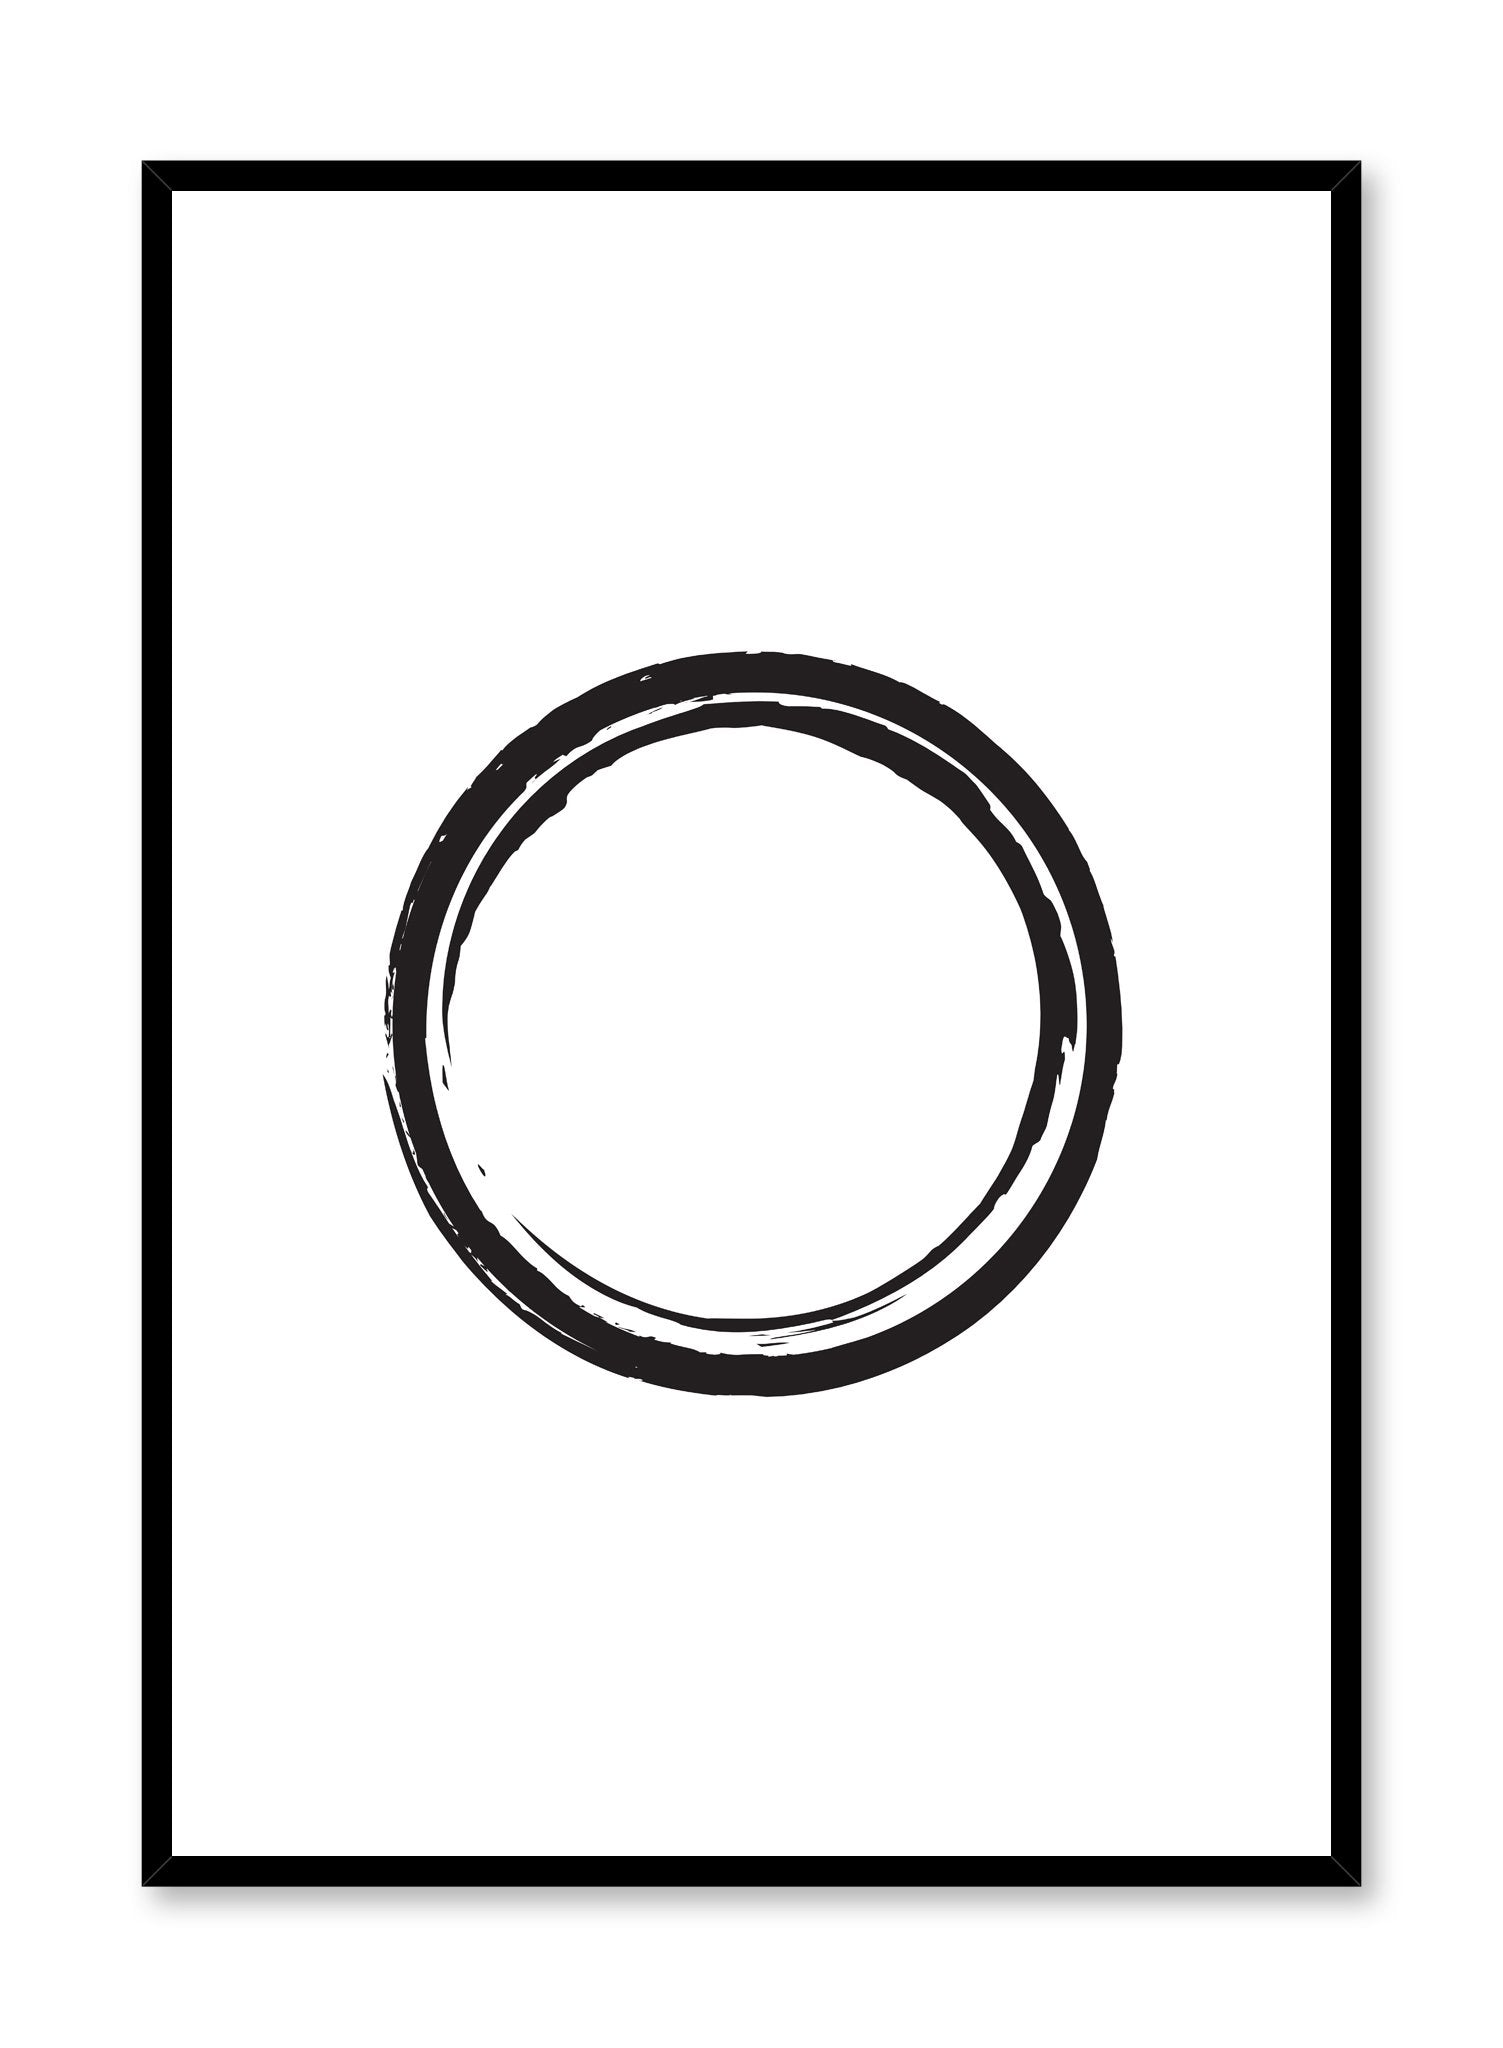 Modern minimalist poster by Opposite Wall with Black Circle abstract geometric design